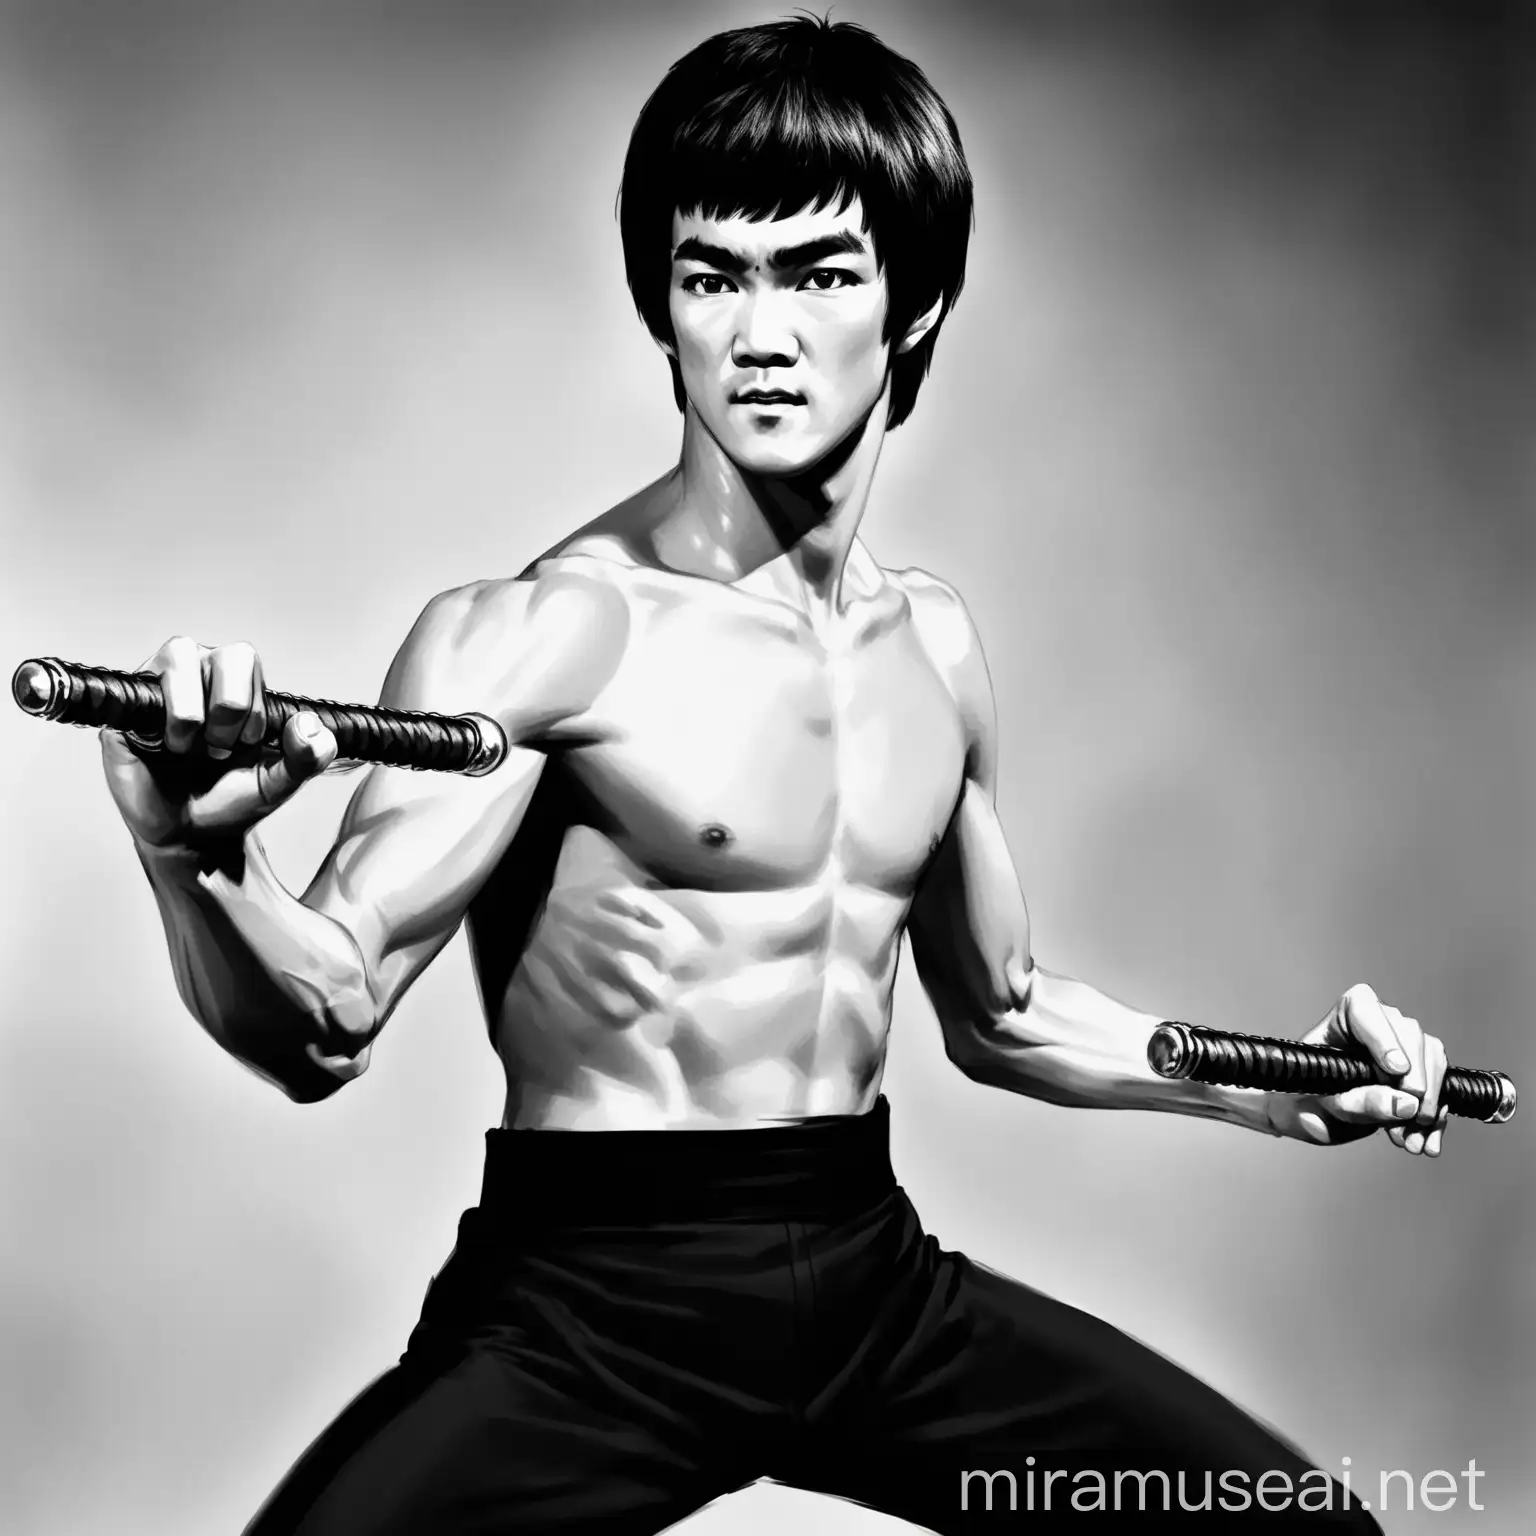 Bruce Lee Martial Arts Master with Nunchucks in Battle Stance